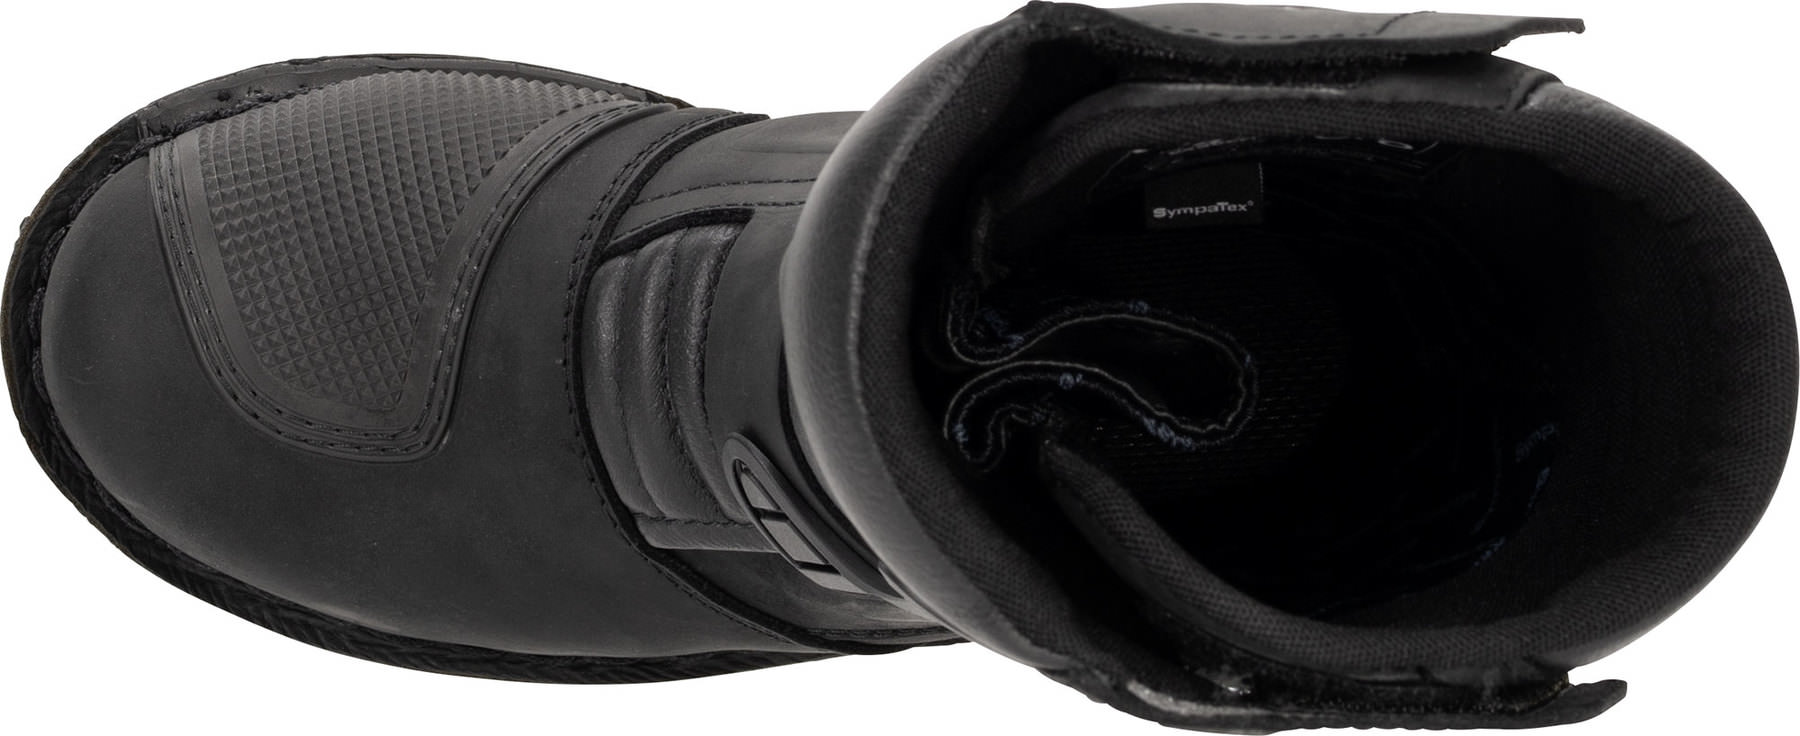 Buy Vanucci VTB 9 Boots | Louis motorcycle clothing and technology